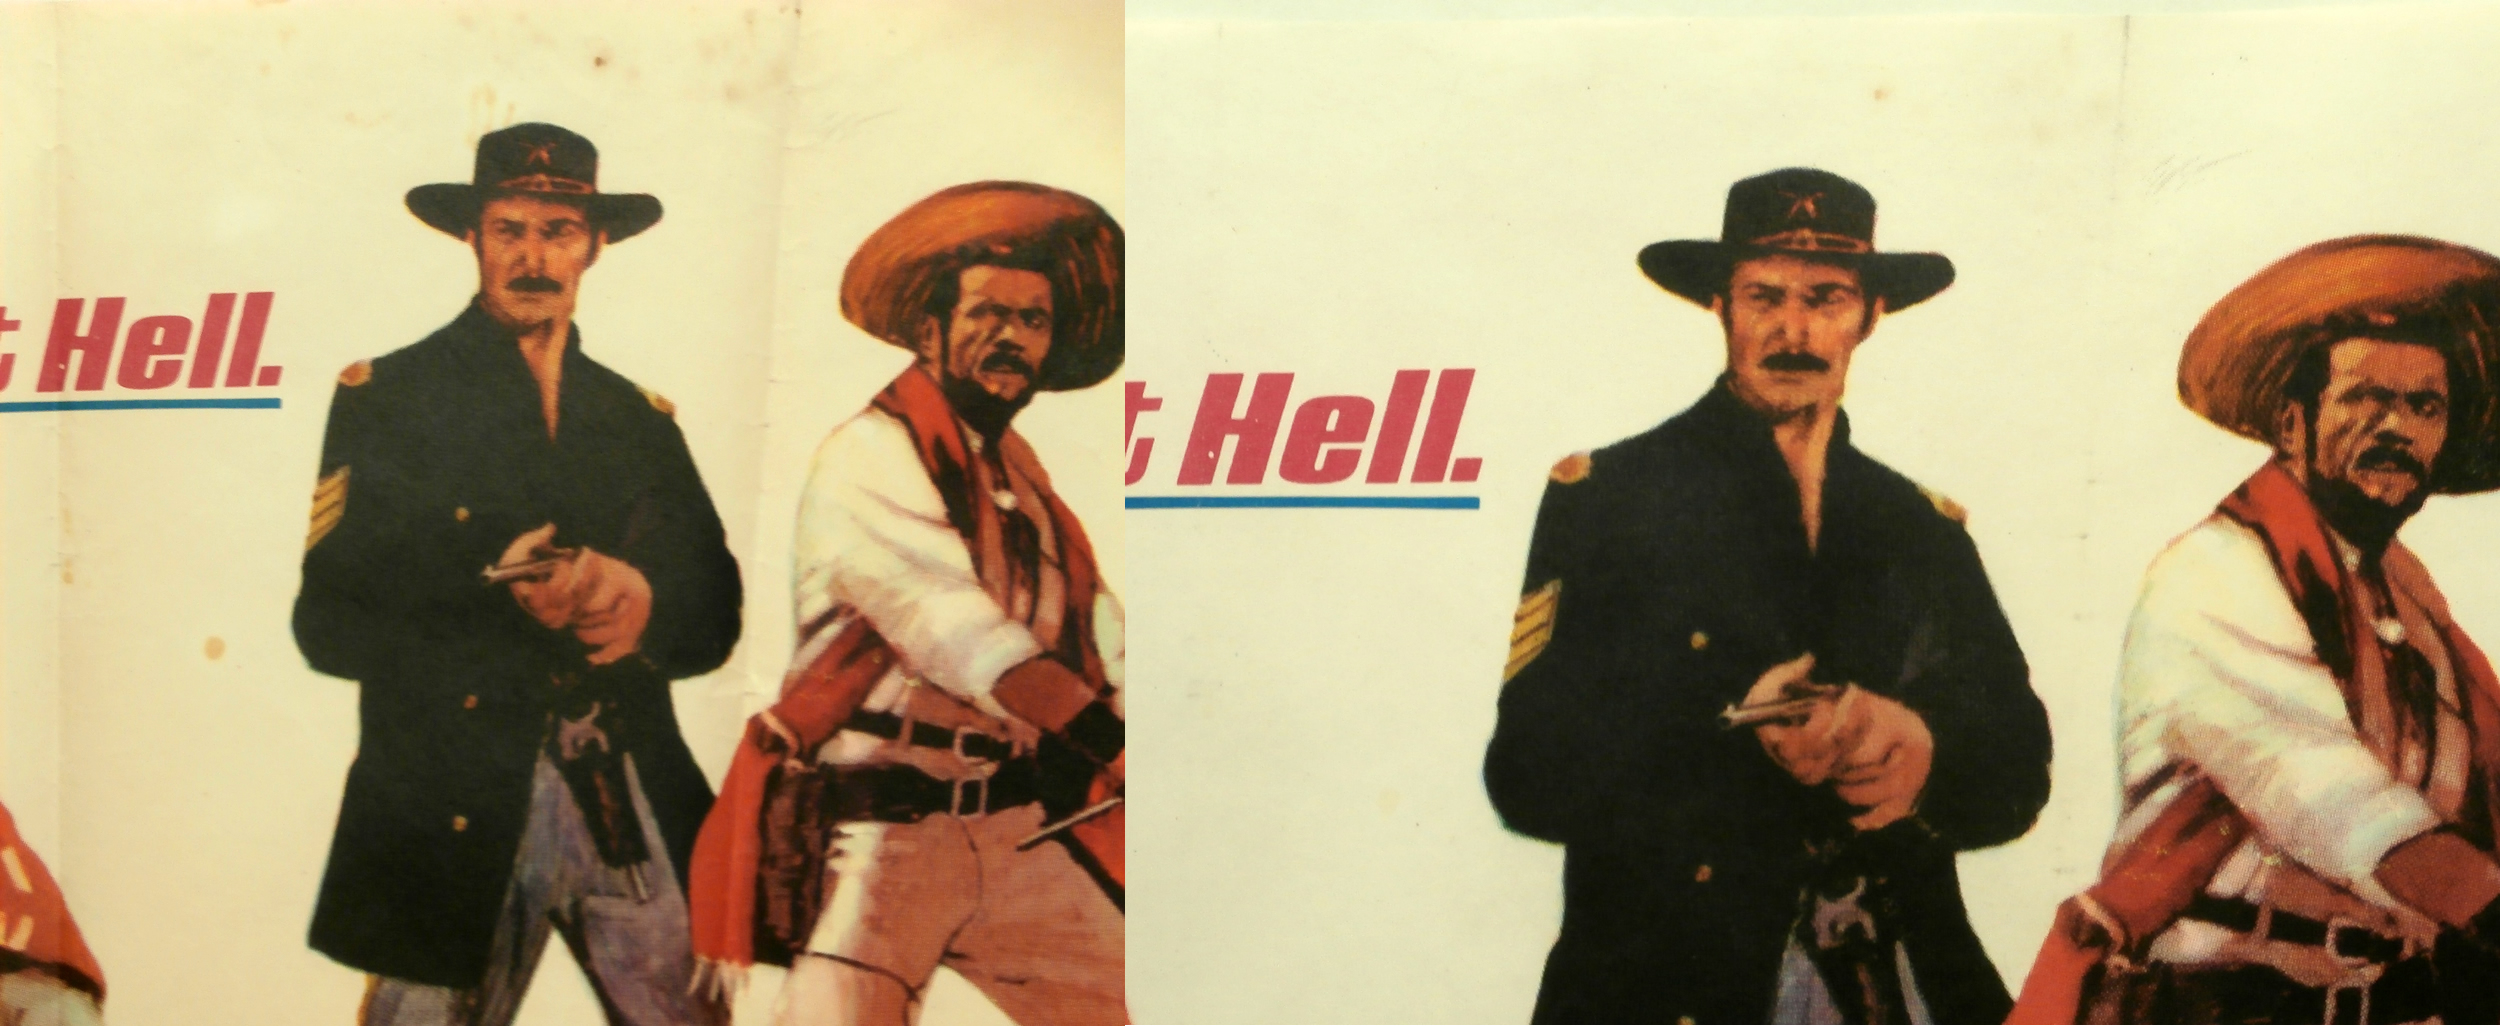 Detail on The Good, The Bad & The Ugly poster